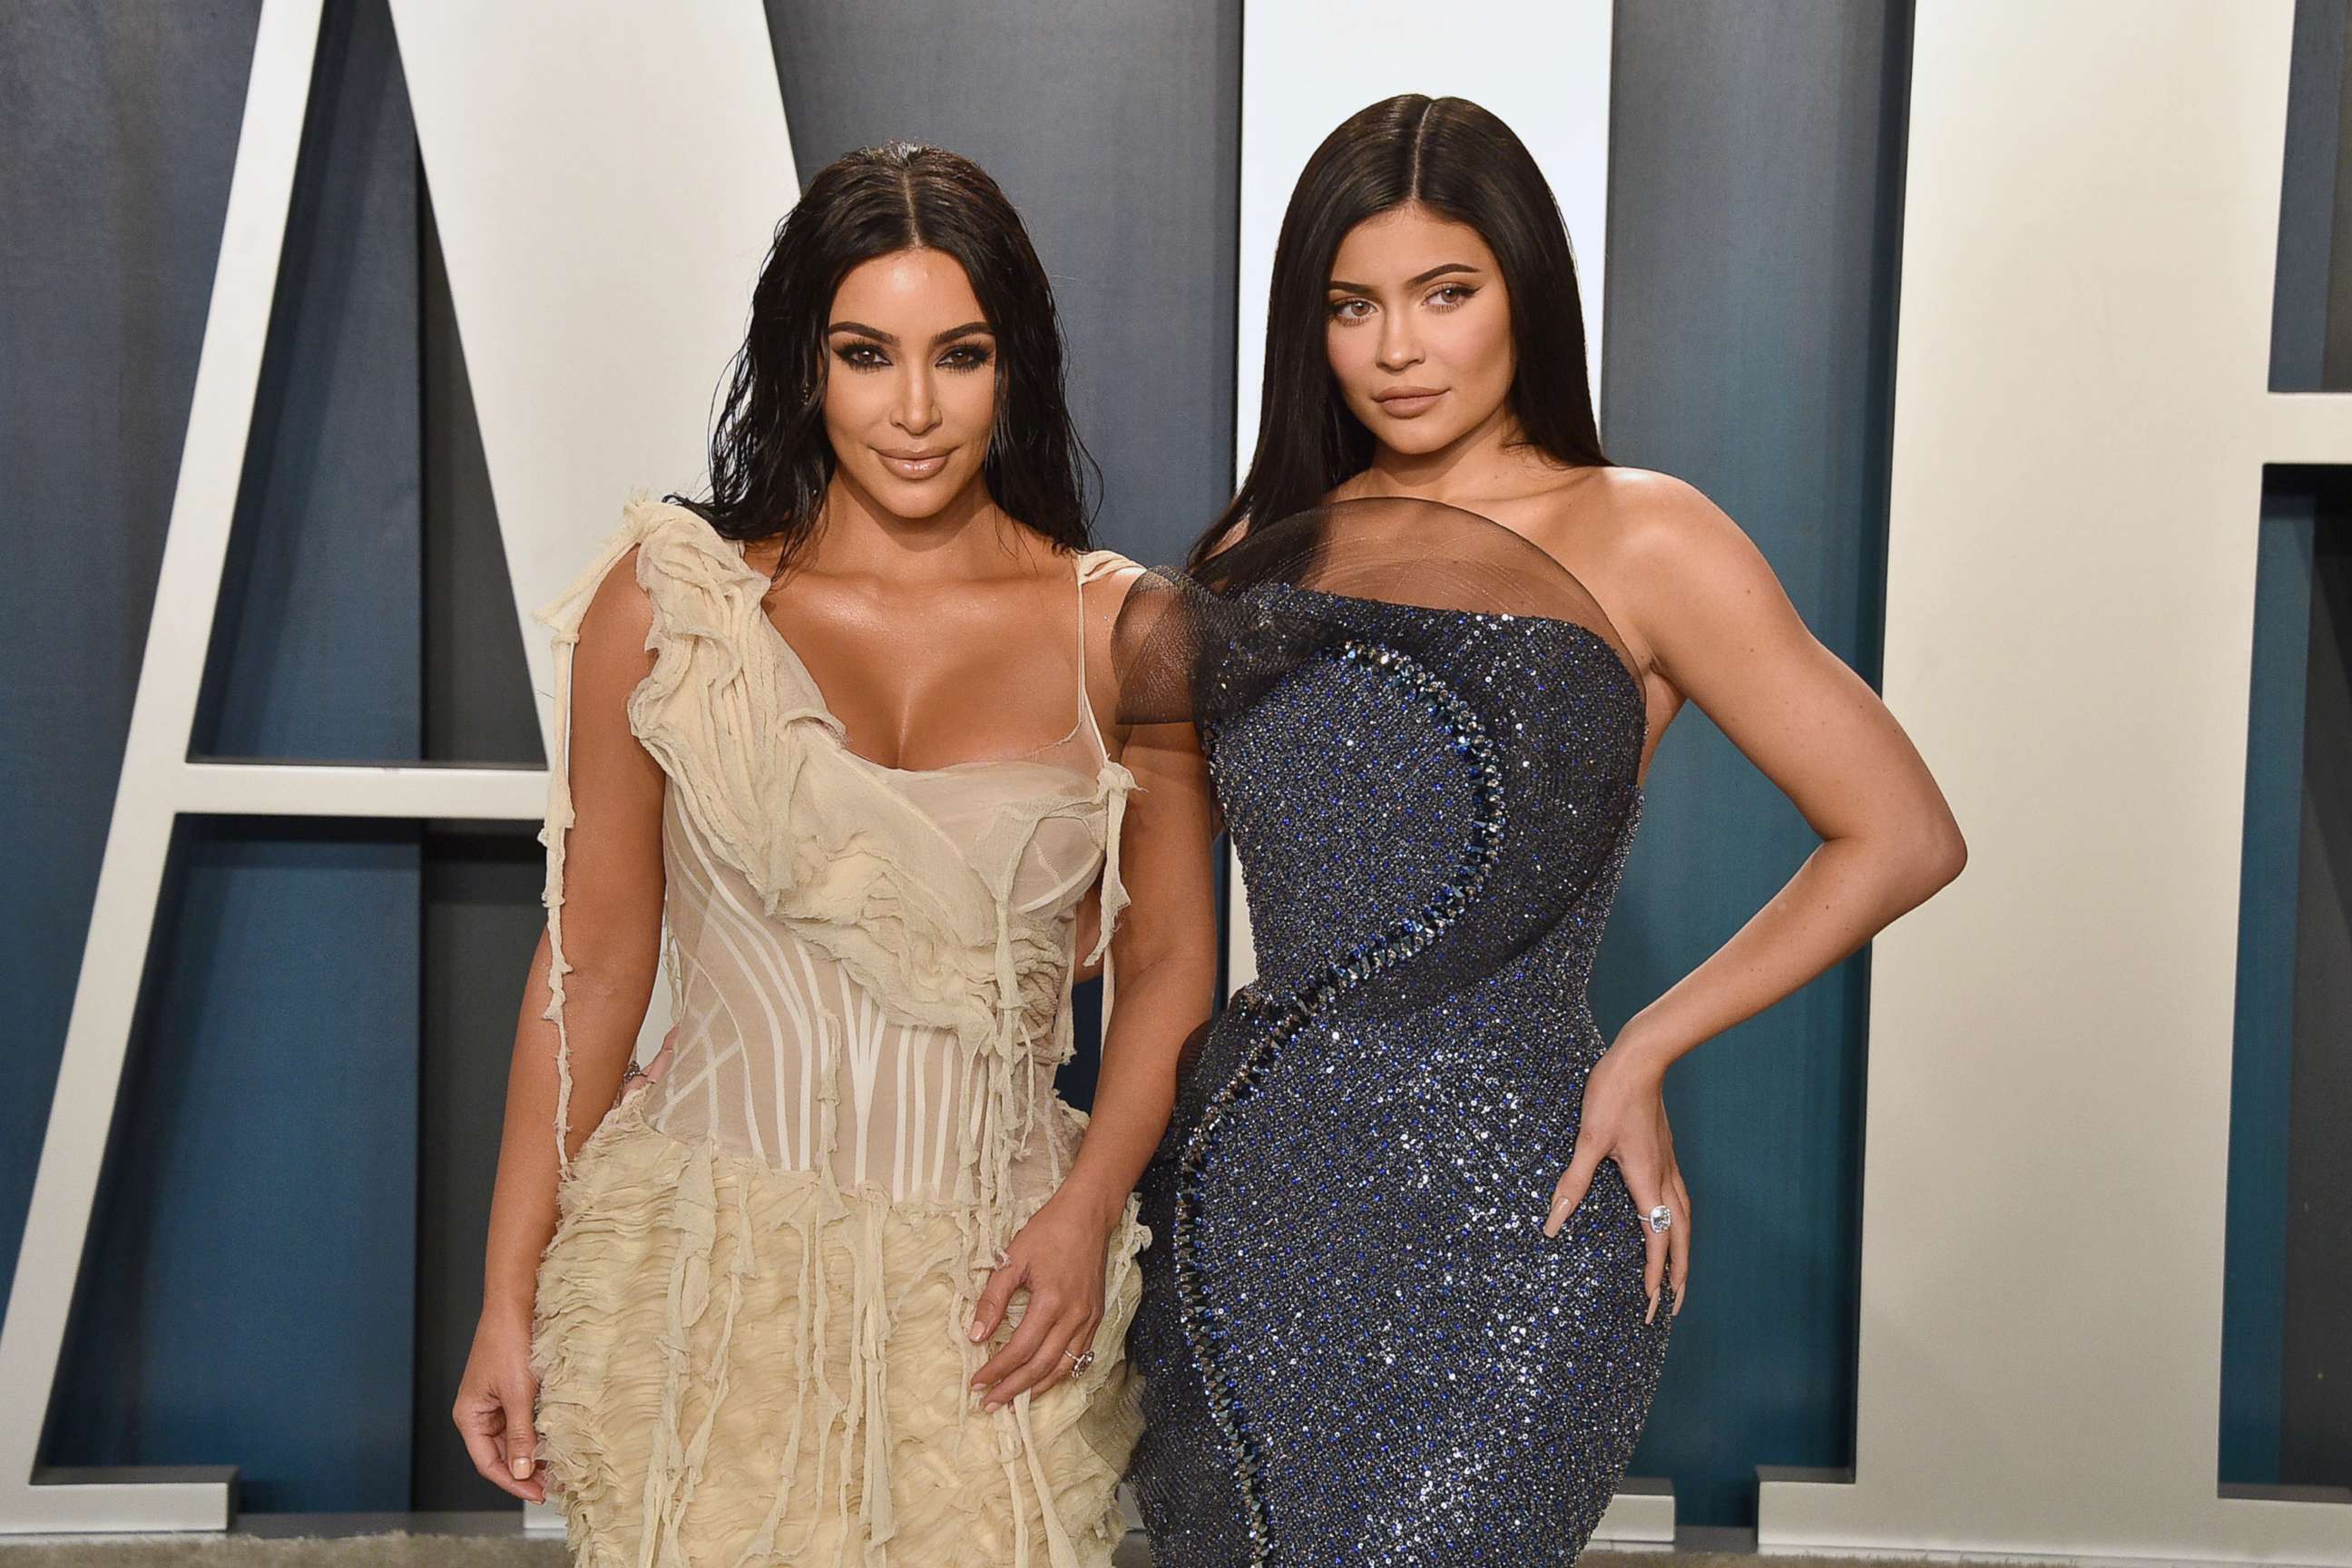 PHOTO: In this Feb 9, 2020 file photo Kim Kardashian and Kylie Jenner attend the 2020 Vanity Fair Oscar Party at Wallis Annenberg Center for the Performing Arts on in Beverly Hills, Calif.